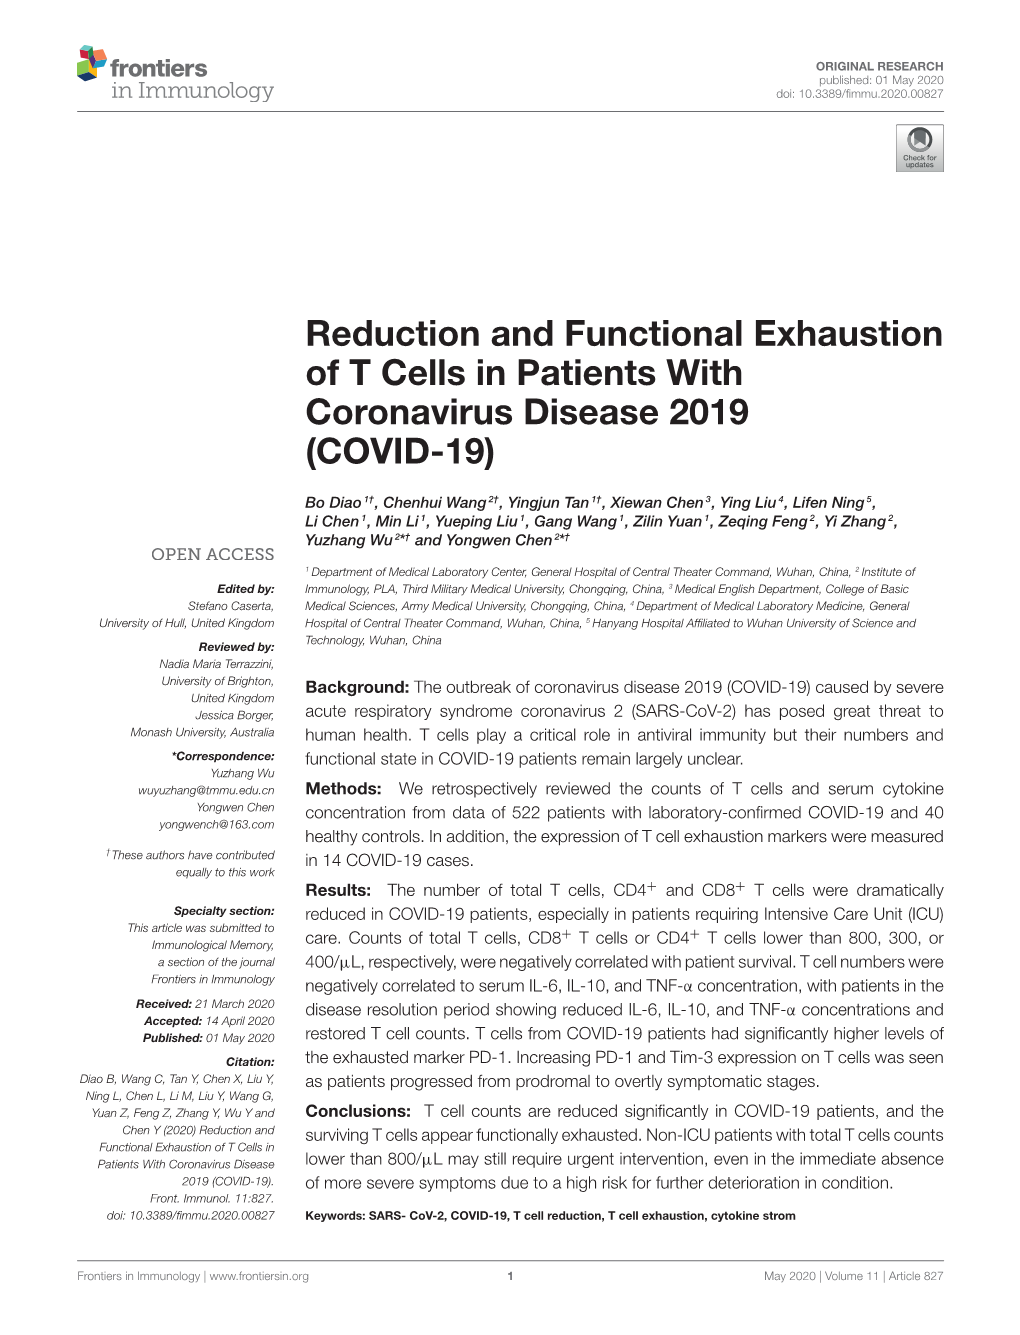 Reduction and Functional Exhaustion of T Cells in Patients with Coronavirus Disease 2019 (COVID-19)